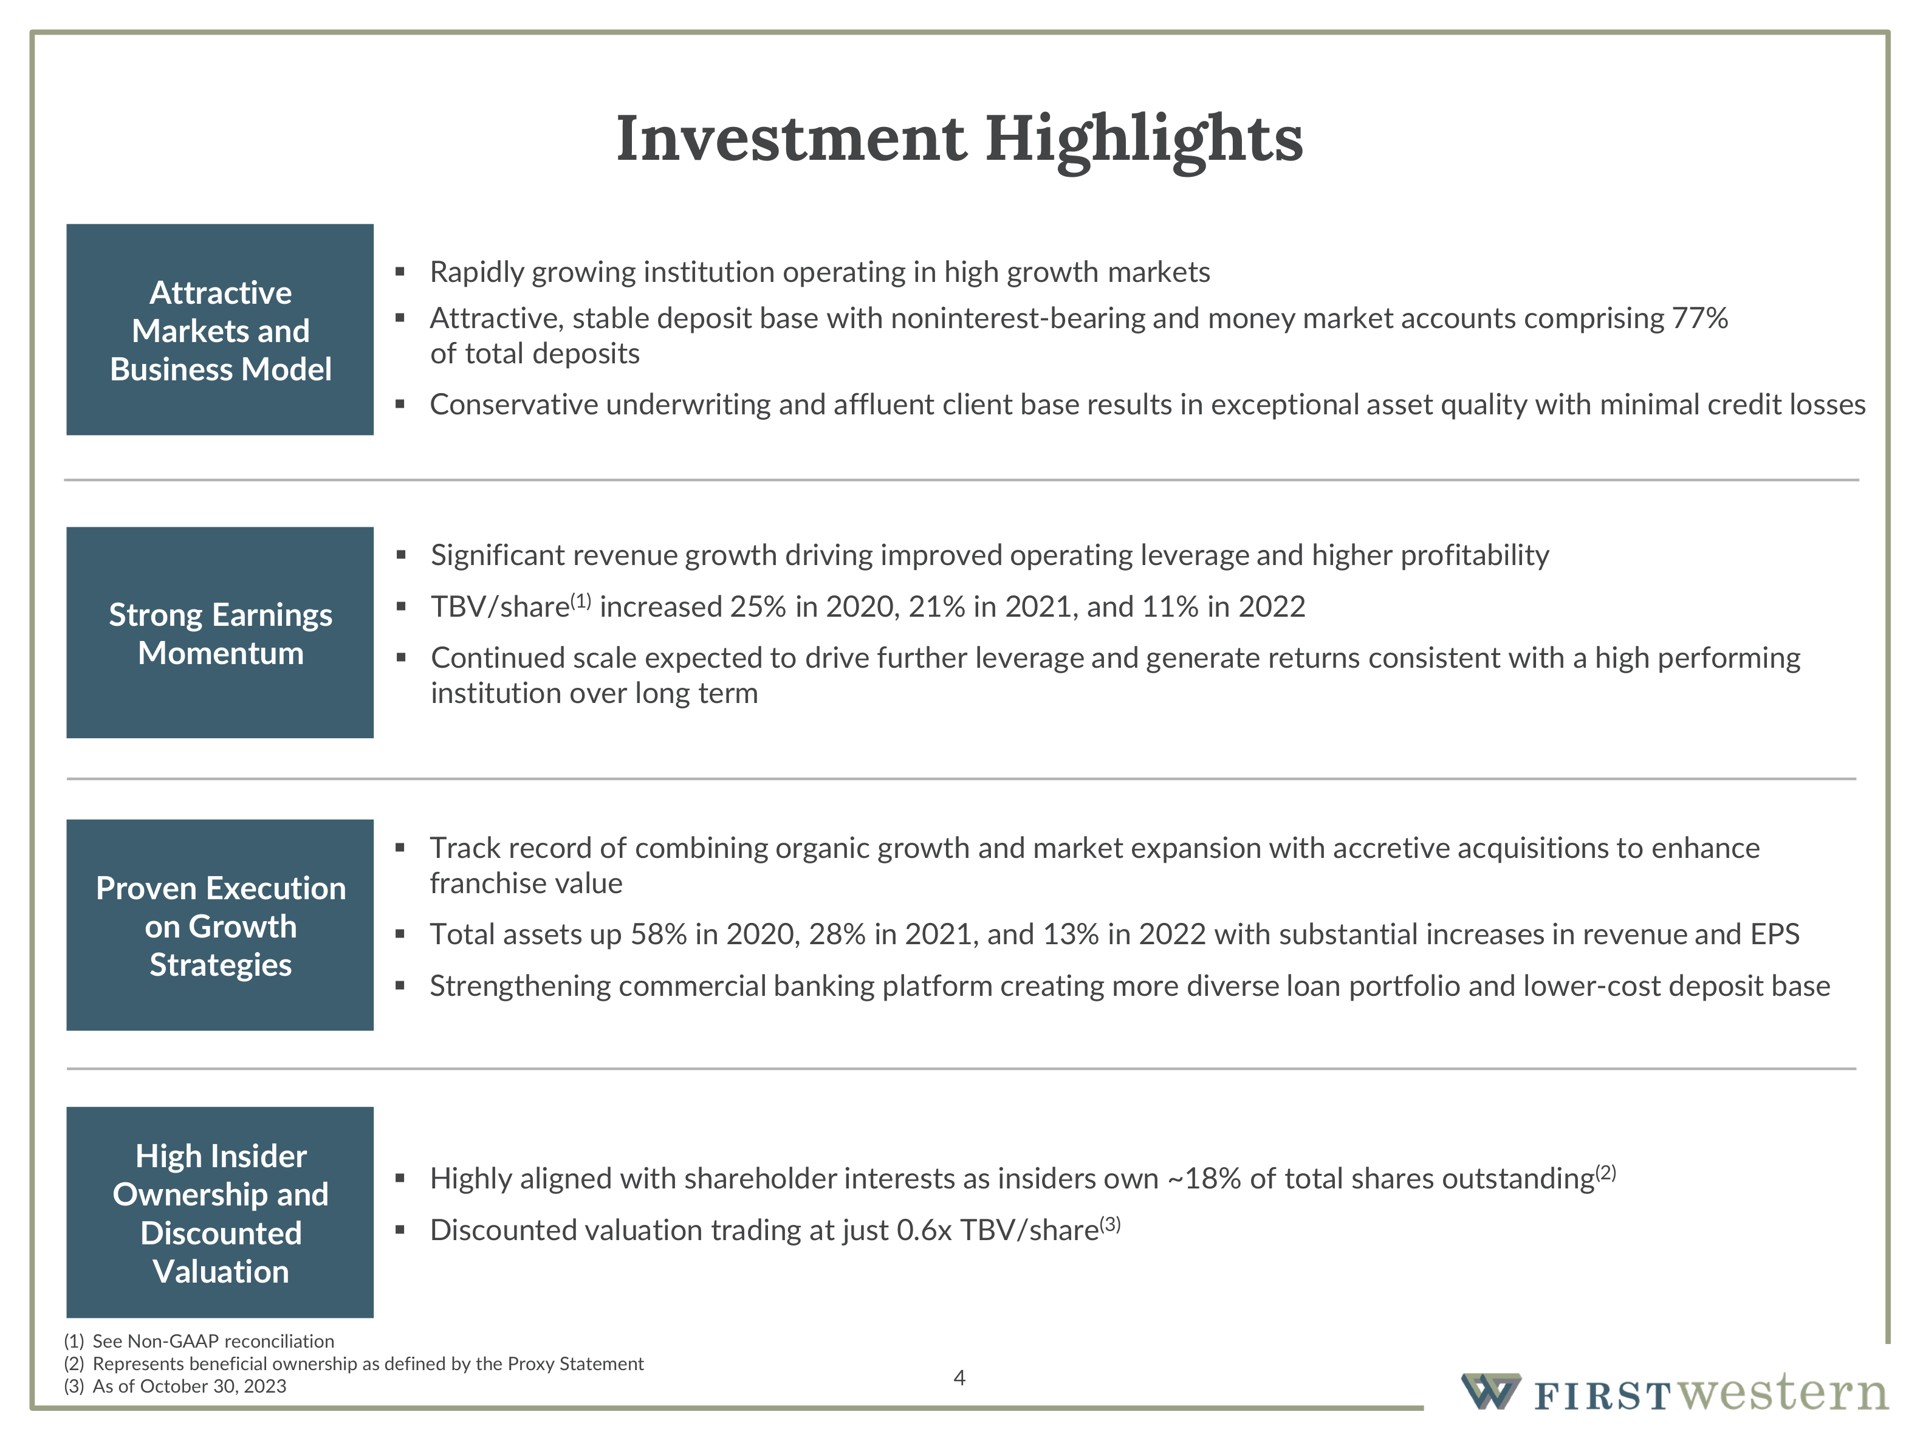 investment highlights | First Western Financial